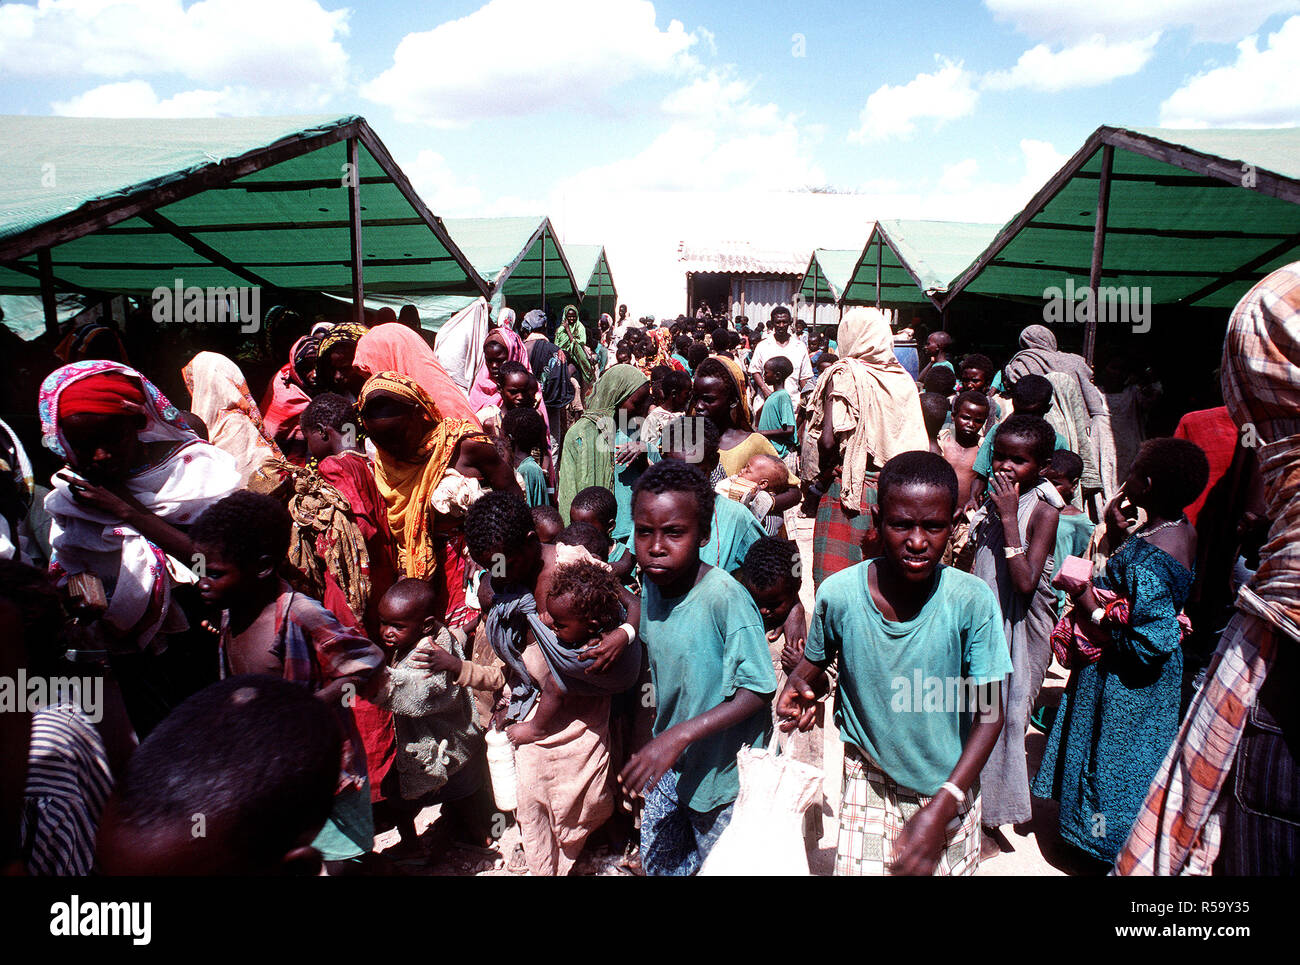 1993 - Somalis gather at the Concern Feeding Center during the multinational relief effort OPERATION RESTORE HOPE.  The center is operated by the Irish relief organization Concern. Stock Photo